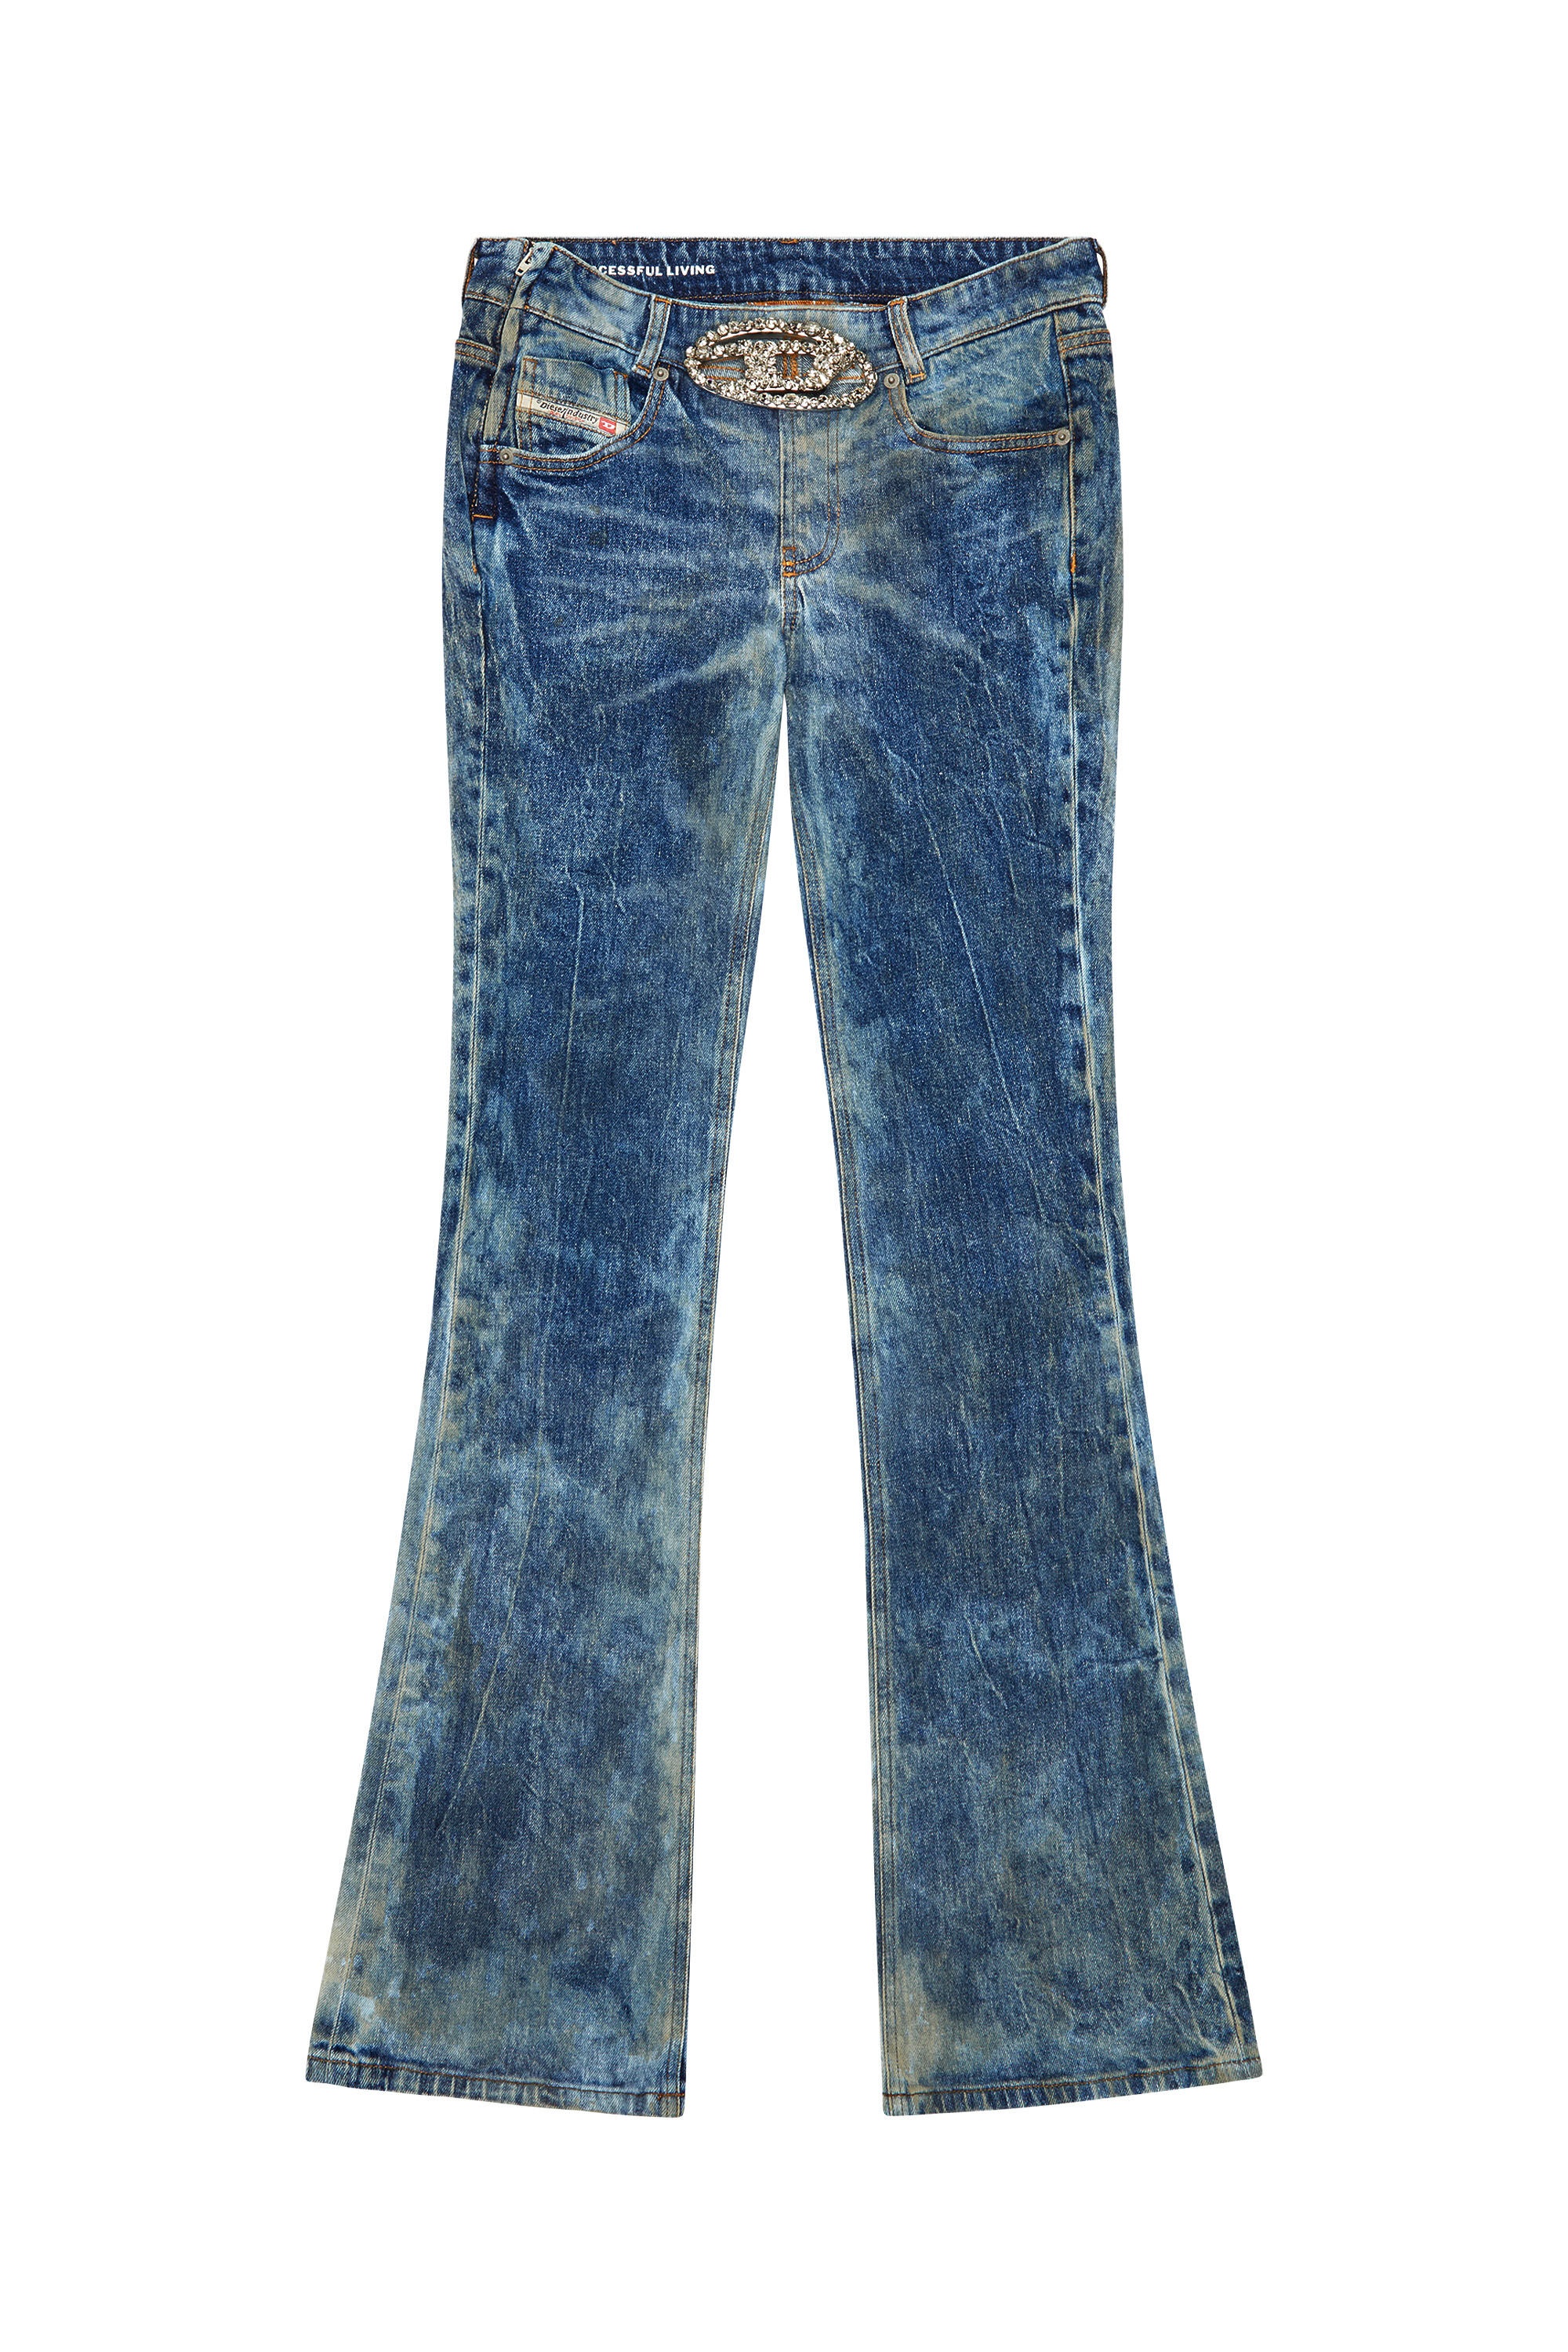 BOOTCUT AND FLARE JEANS 1969 D-EBBEY 0PGAL - 1